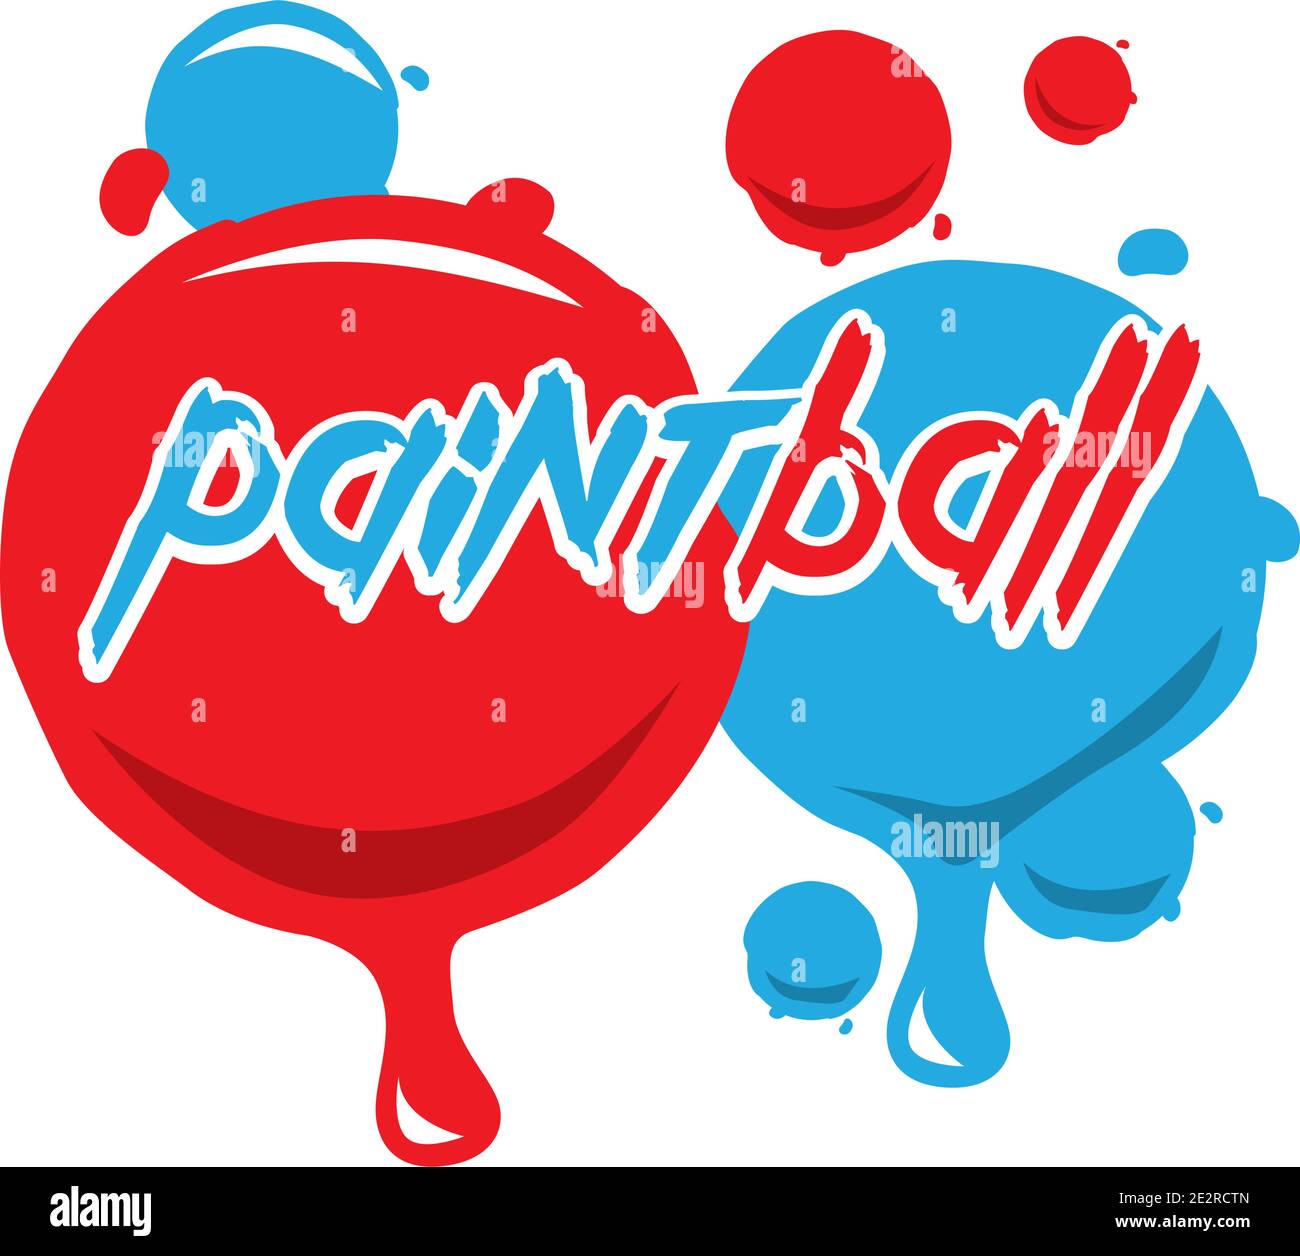 Vector logo for paintball and airsoft game Stock Vector